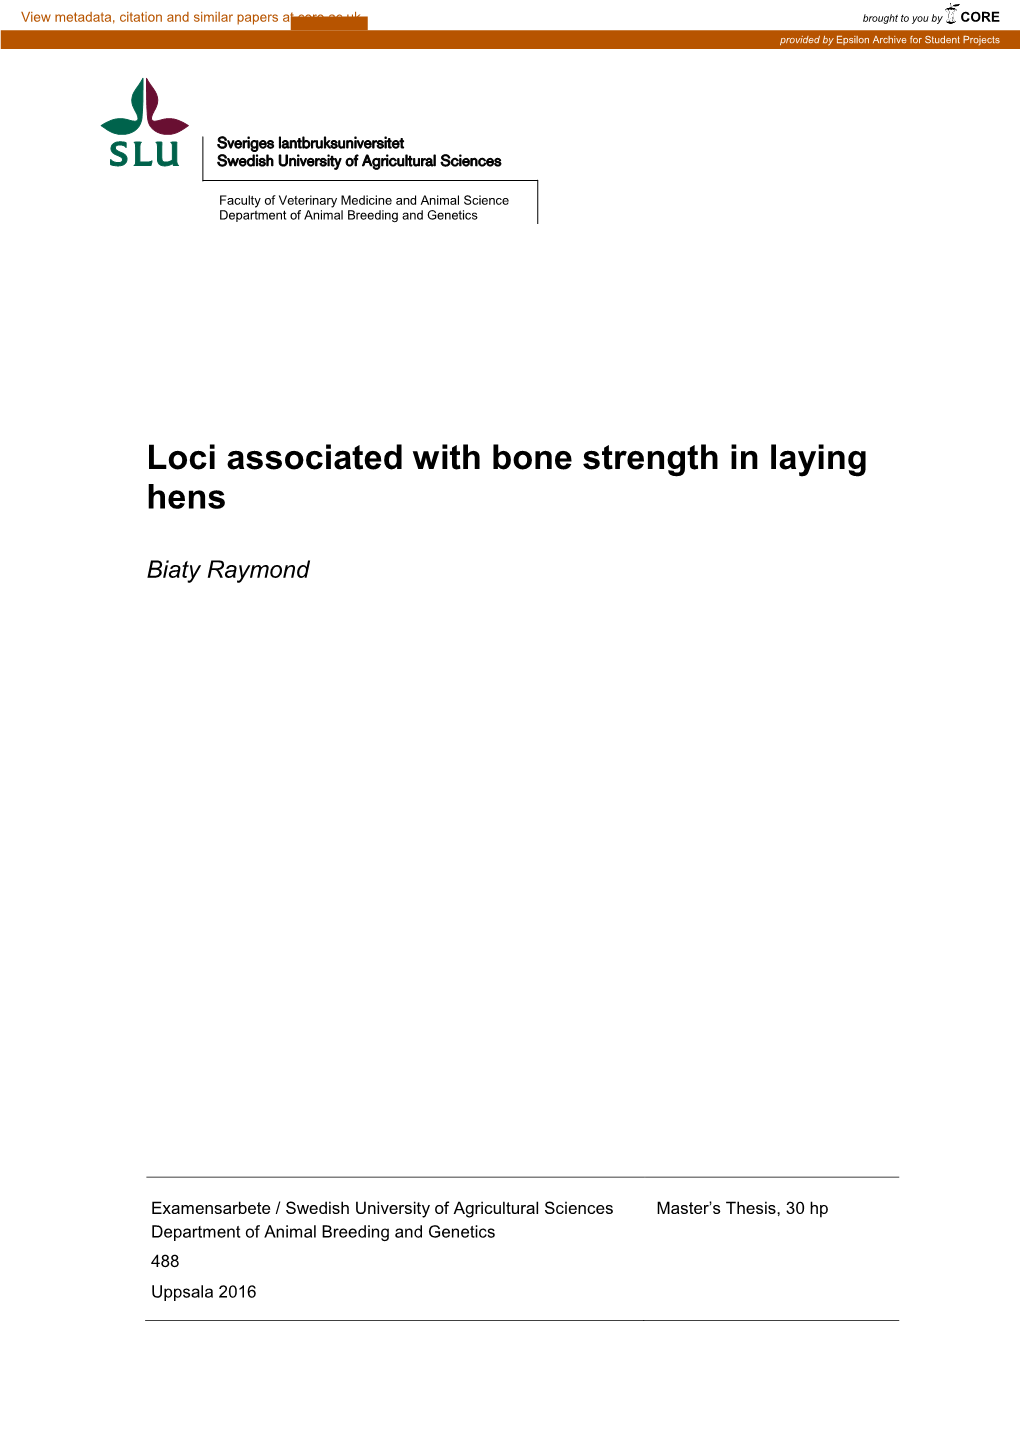 Loci Associated with Bone Strength in Laying Hens